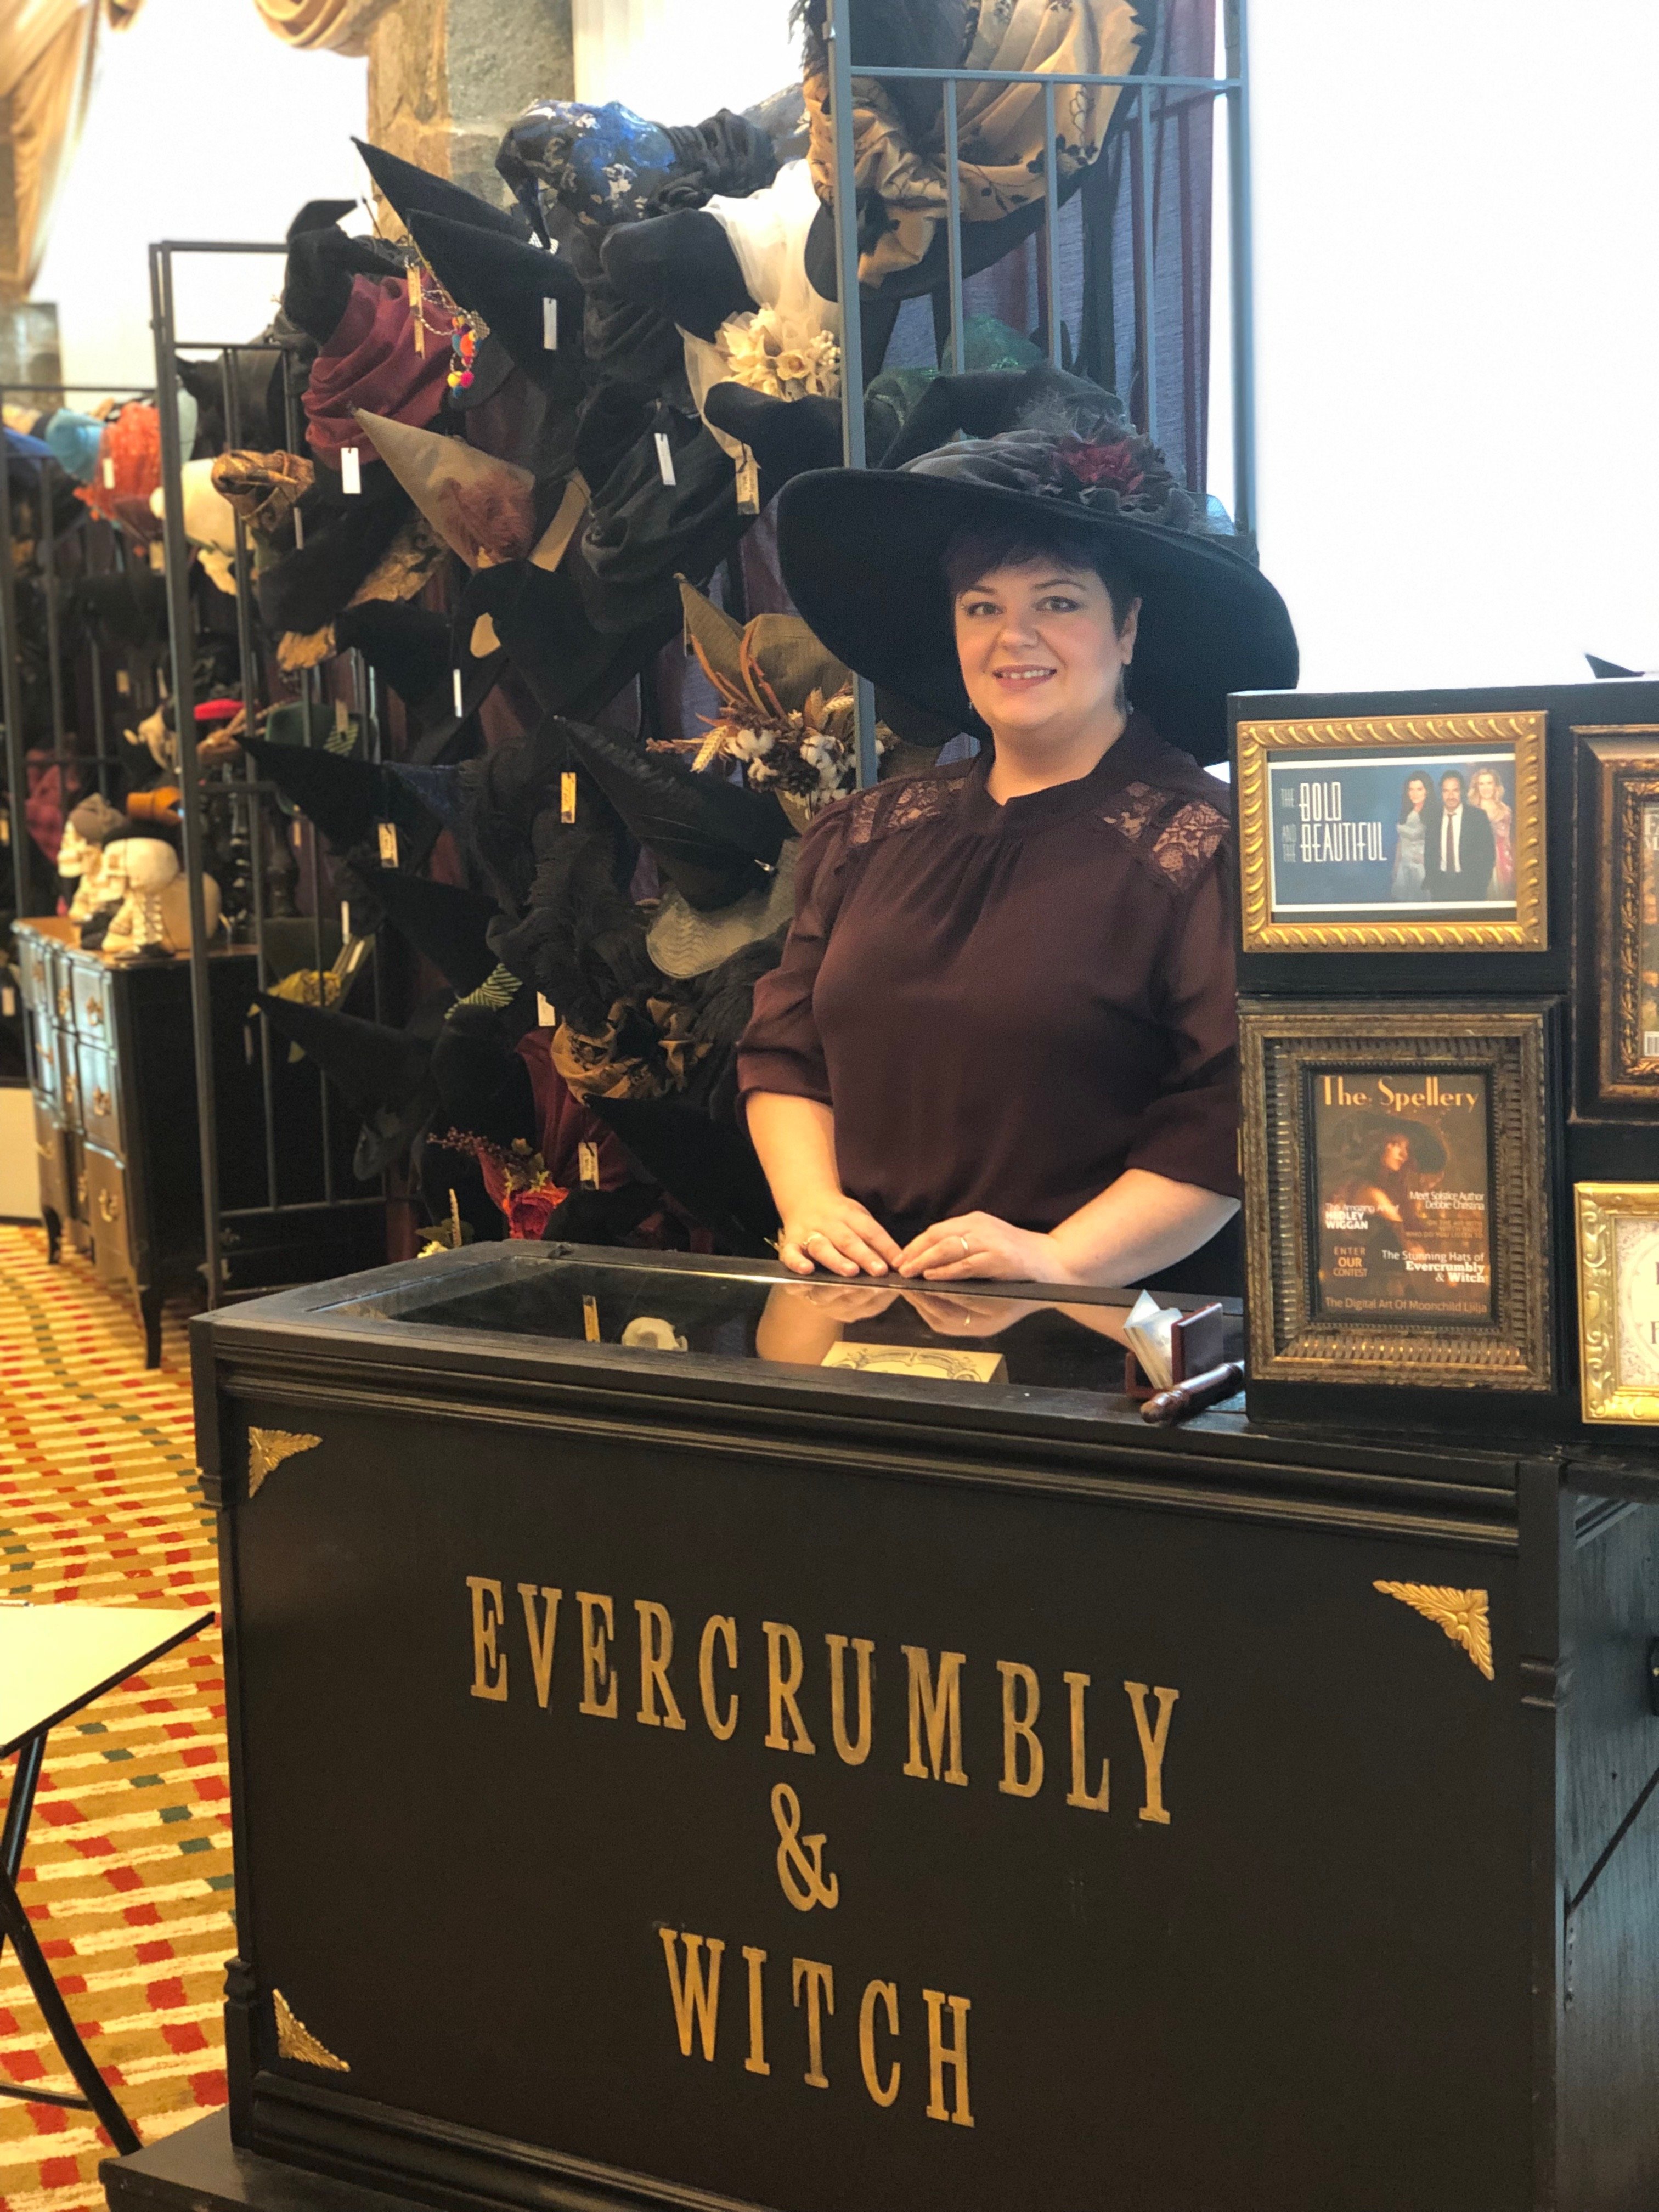 The proprietor of vendor Evercrumbly and Witch, at her booth, selling witch's hats